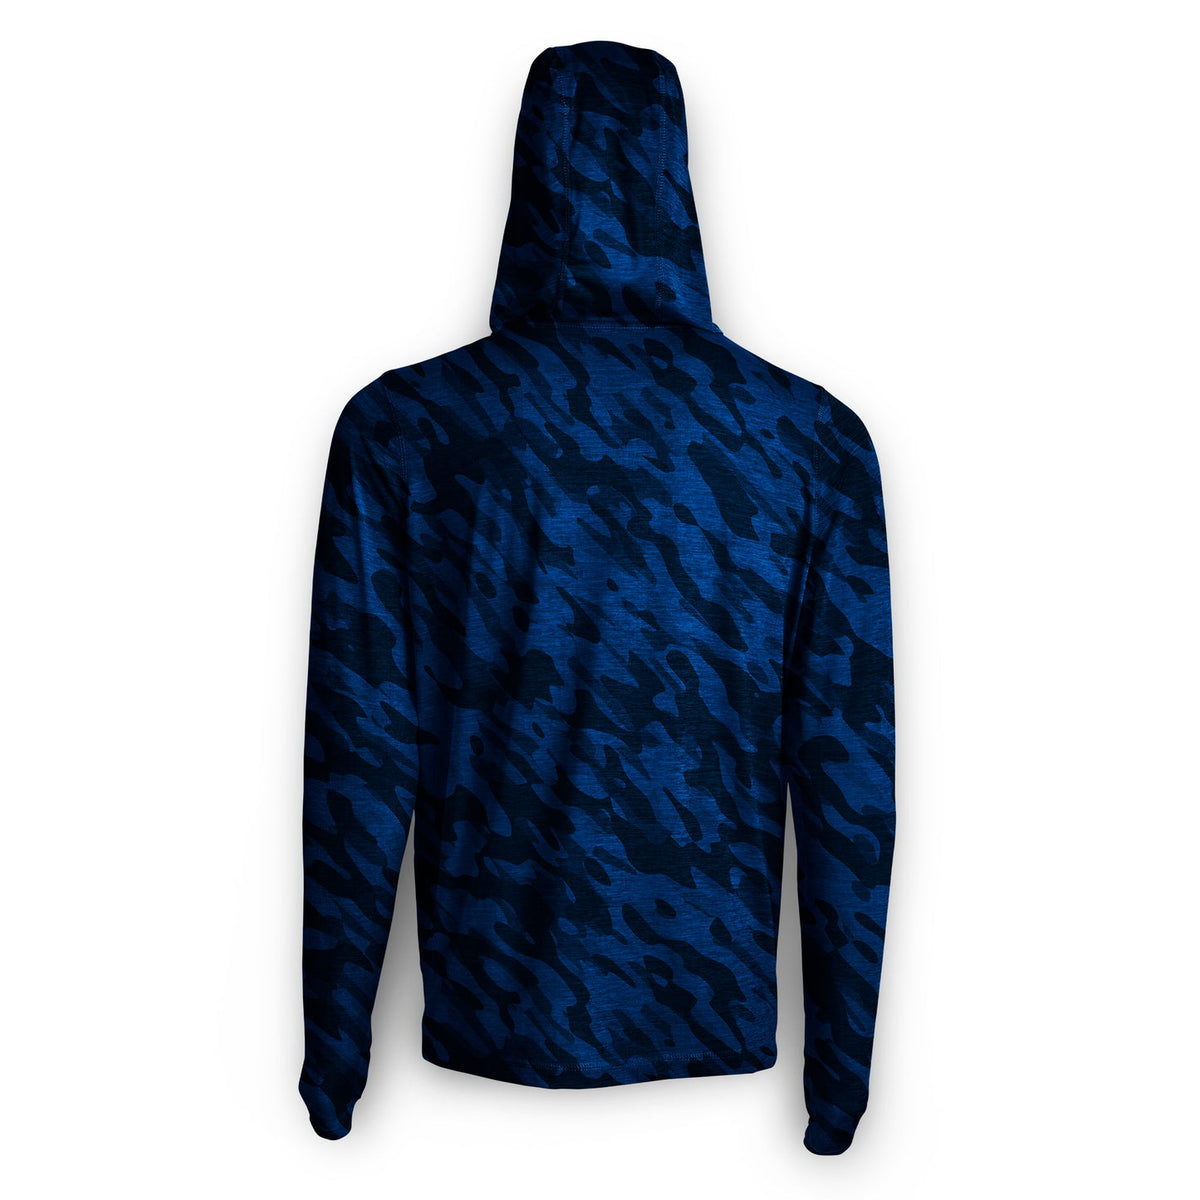 SCALES True Camo Active Performance Hooded Long Sleeve 